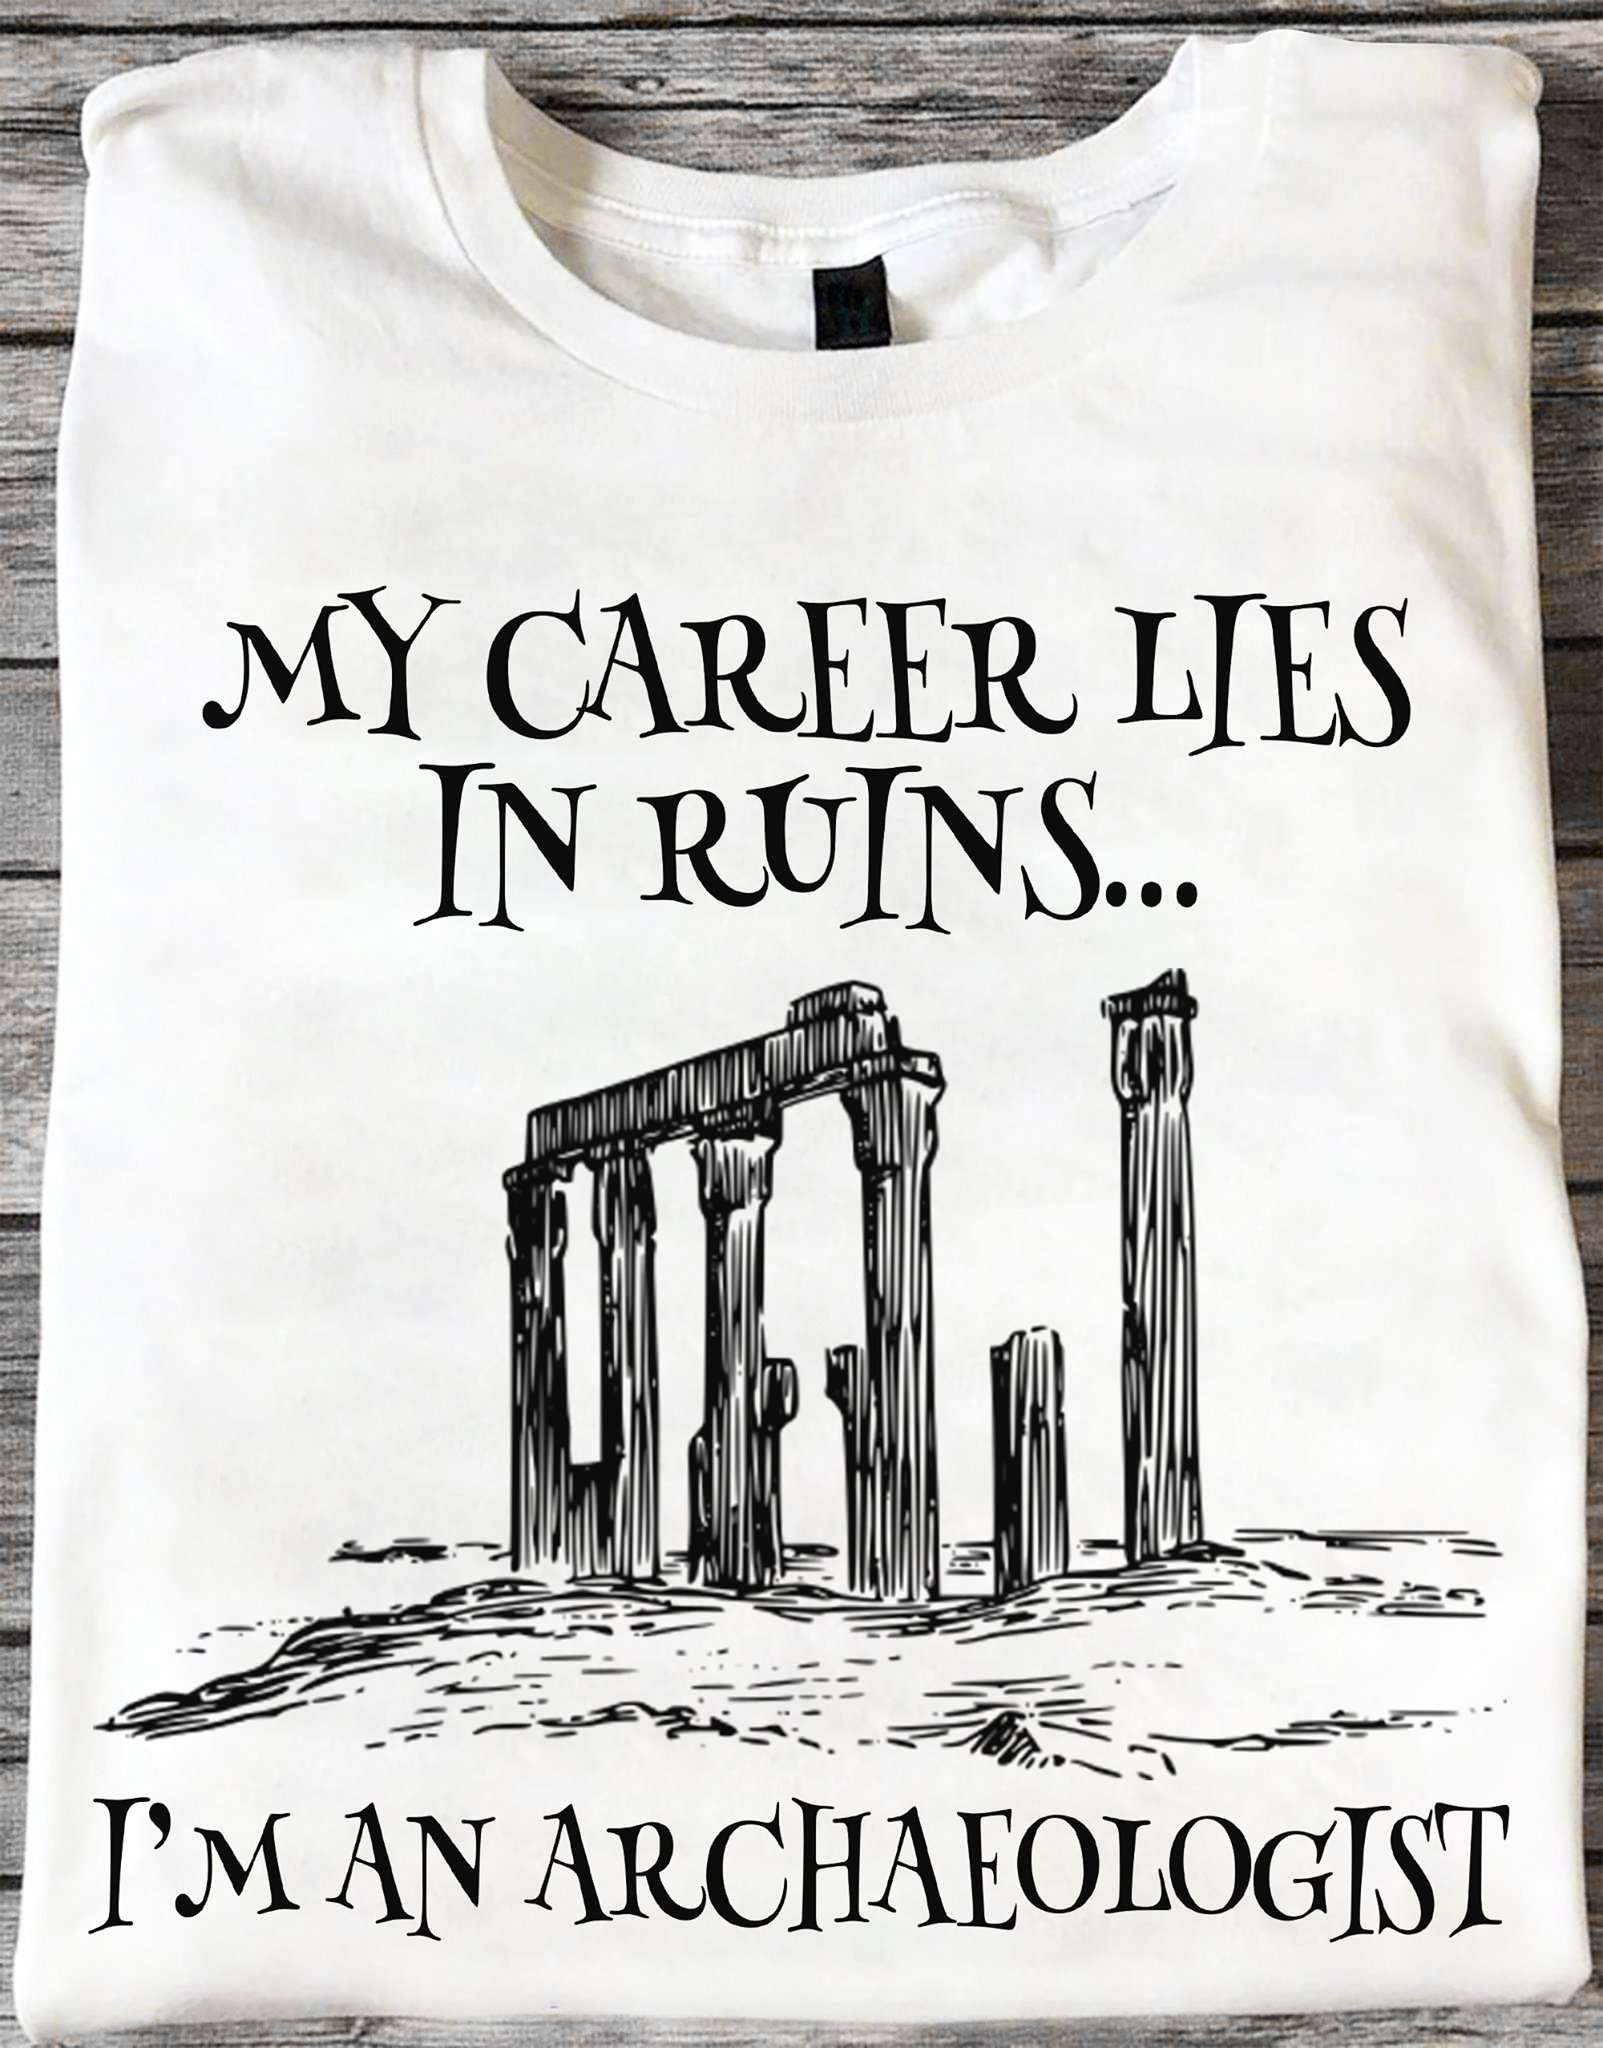 My career lies in ruins - I'm an archaeologist, Archaeologist the job